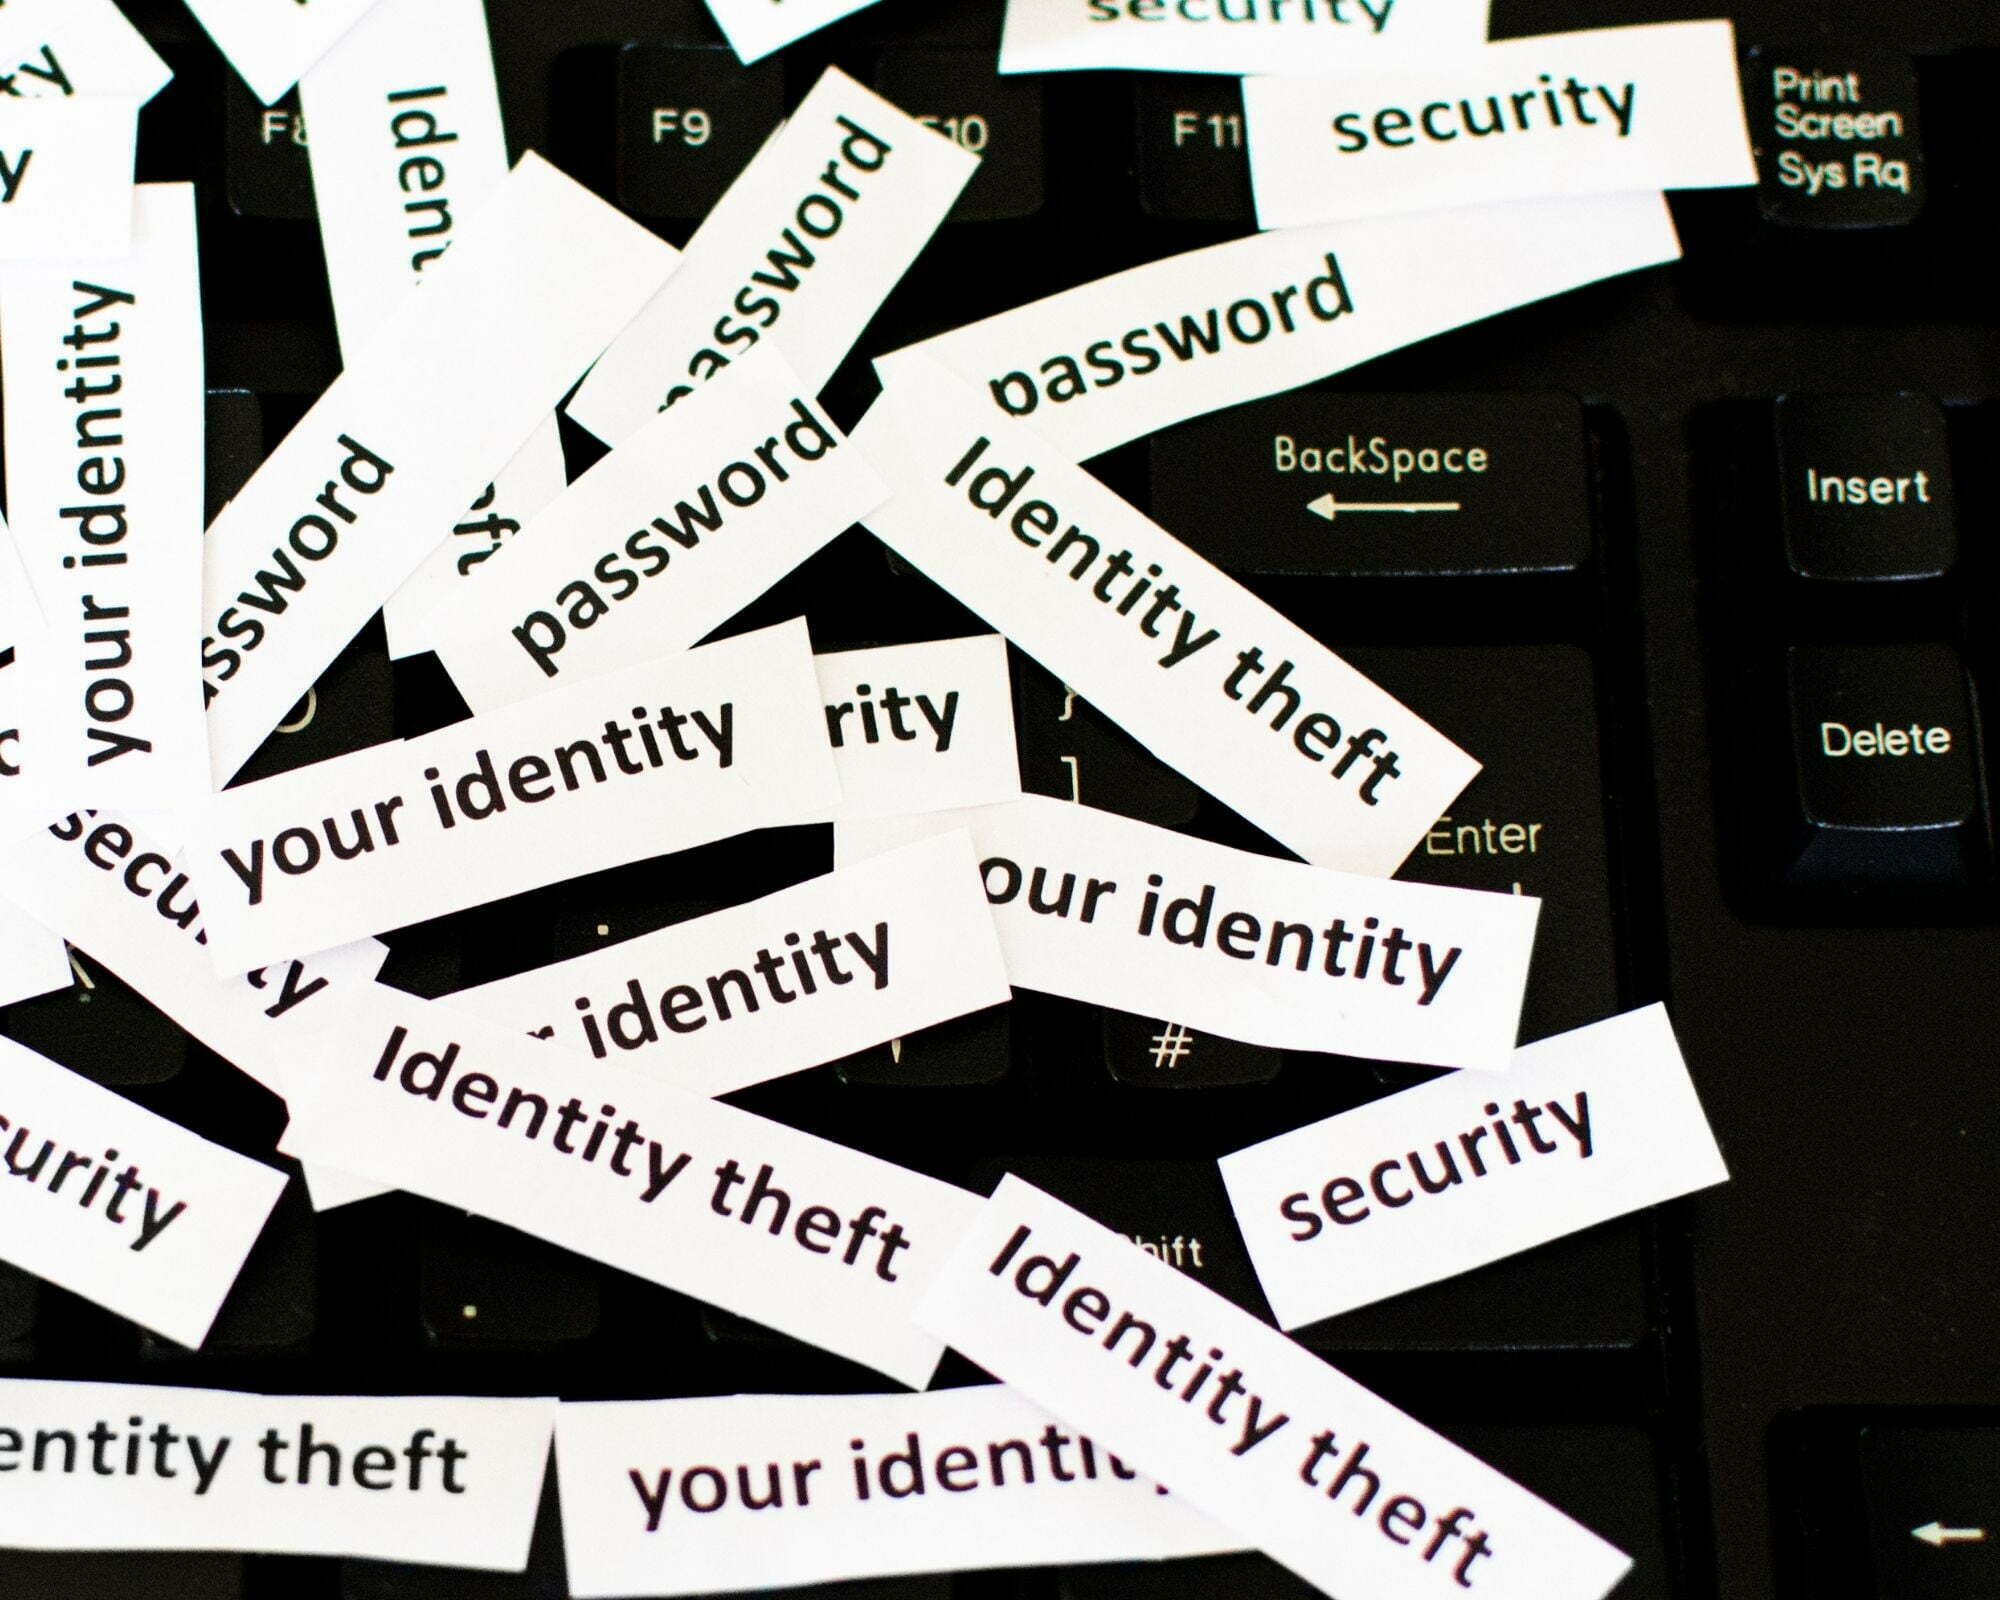 Passwords on a keyboard, internet safety, identity theft, security. Password security: staying safe online is important.